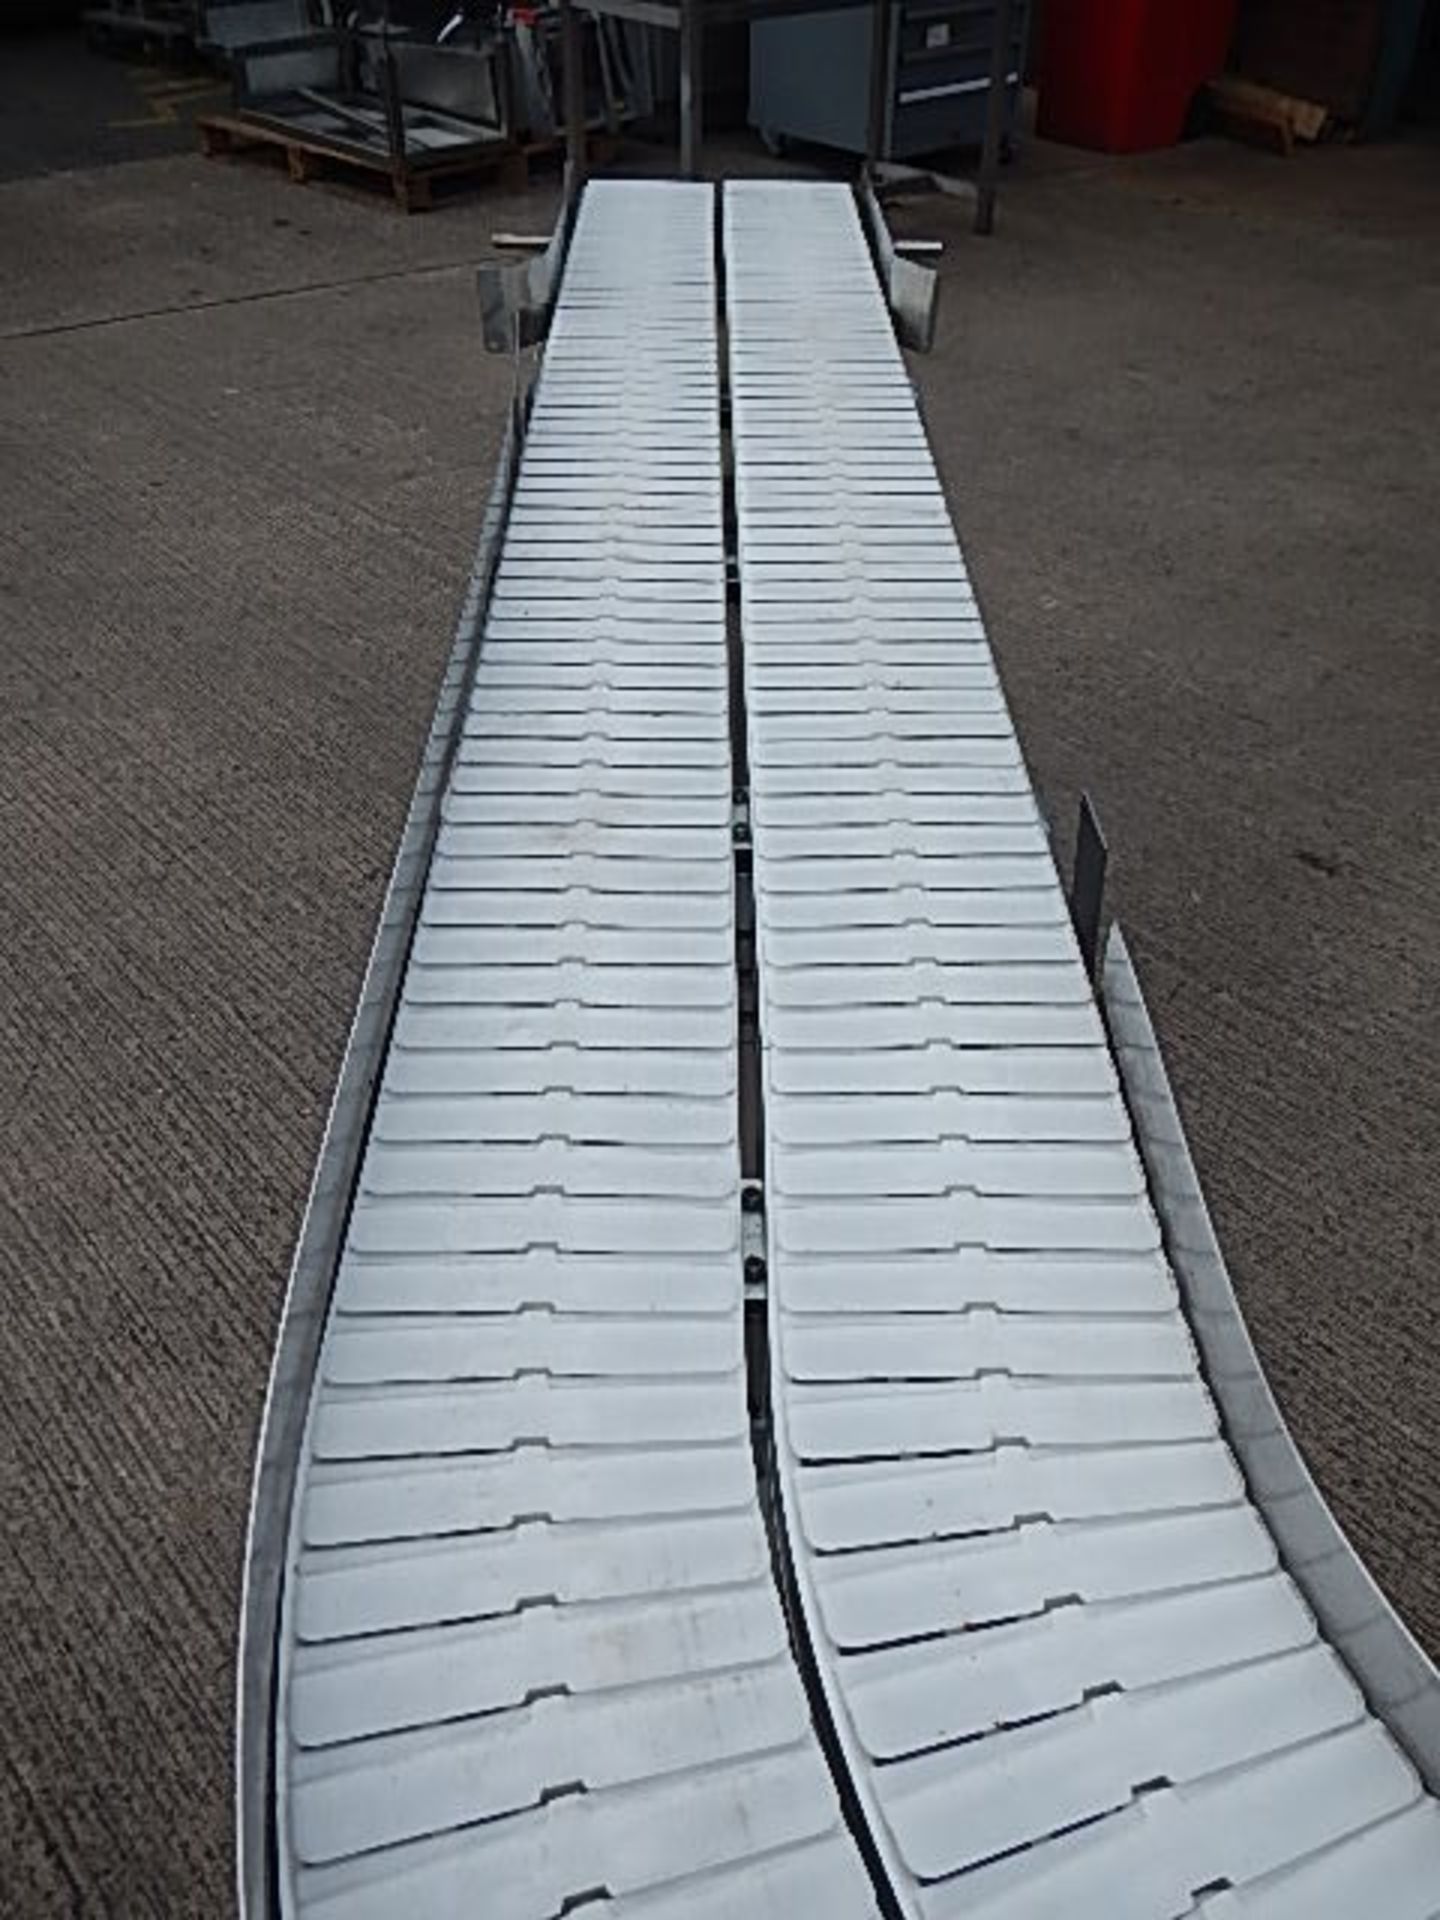 FlexLink white plastic slat sanitary belt conveyor with a 90 degree bend at the end - Image 6 of 7